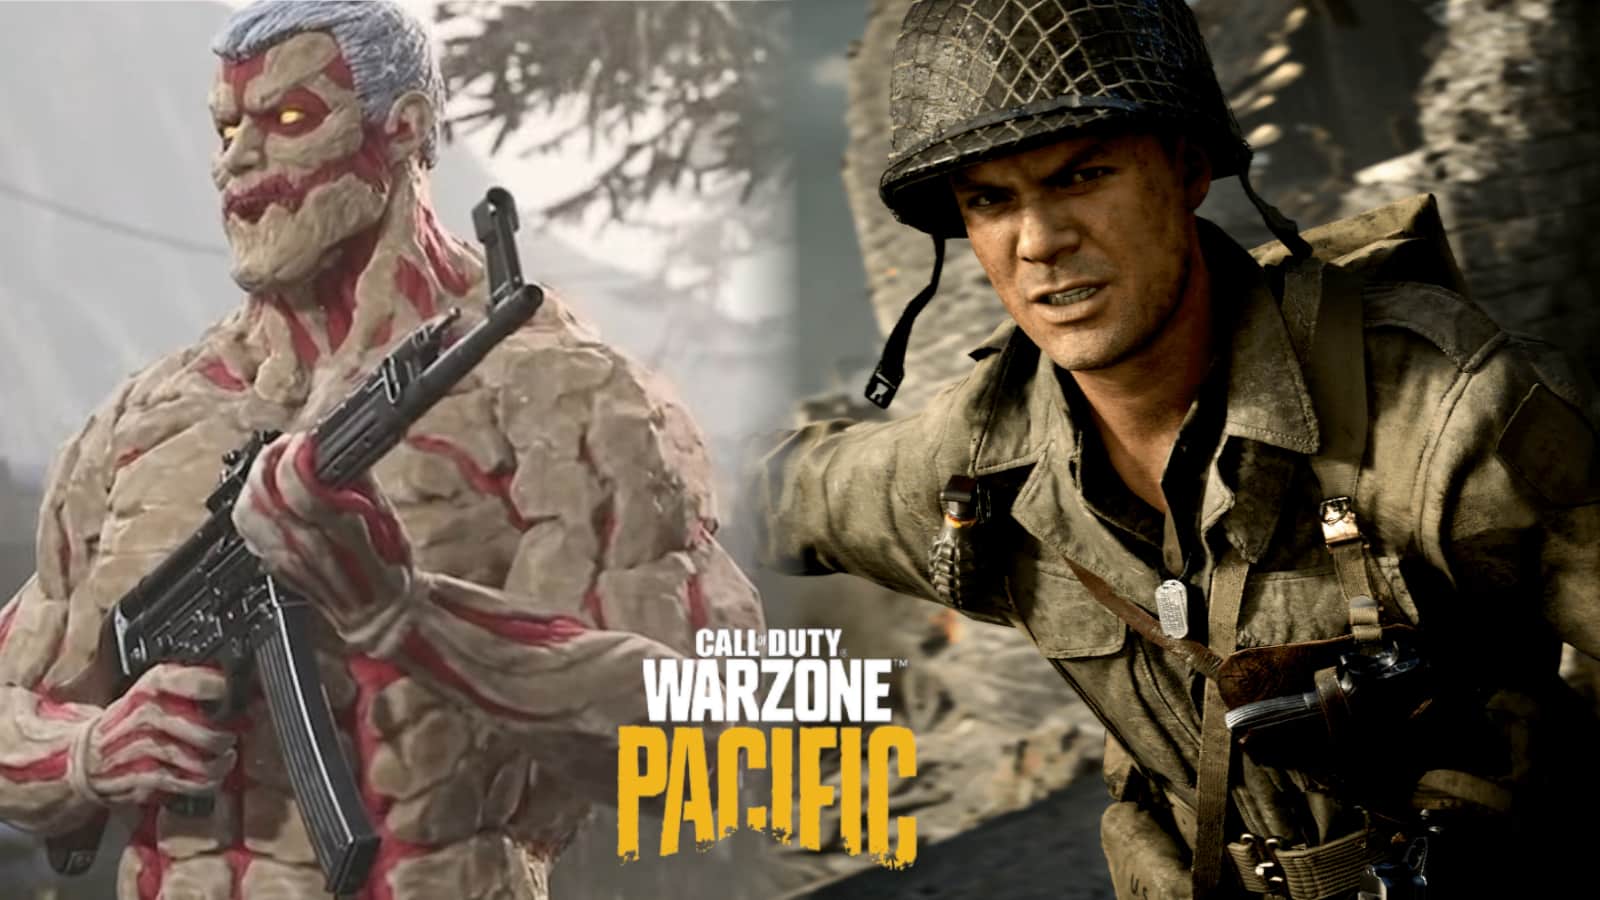 Warzone community demands WW2-themed skins instead of "anime s**t"